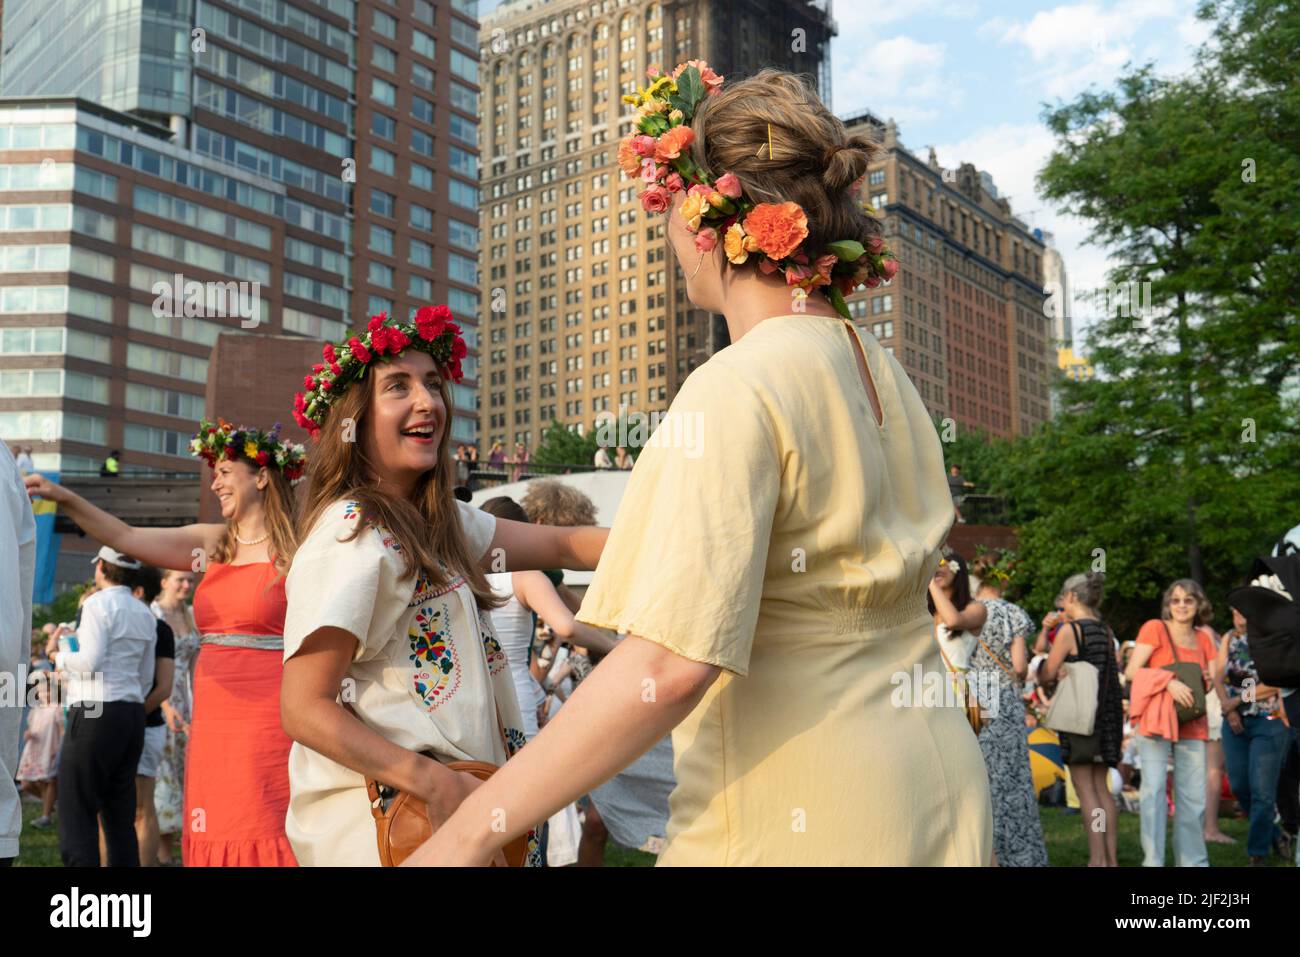 Since 1996, thousands of people have come to Battery Park City in Lower Manhattan for the Swedish Midsummer Festival. Stock Photo